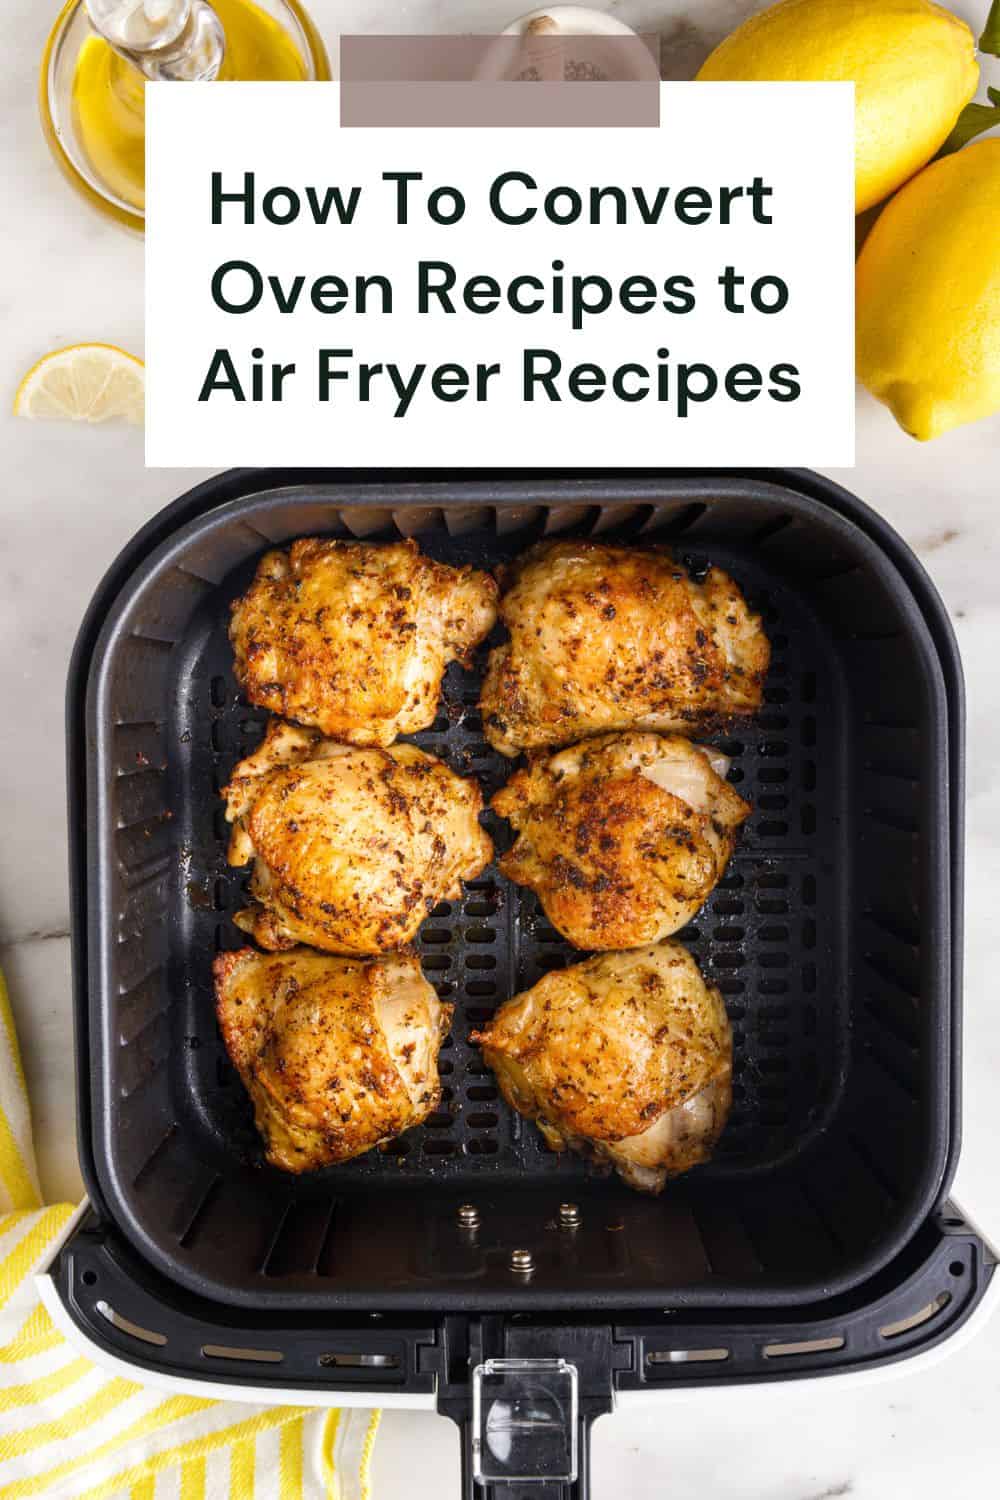 Image for How to Convert Oven Recipes to Air Fryer Recipes. Image in the background shows an ir fryer basket that has cooked chicken thighs in it. 